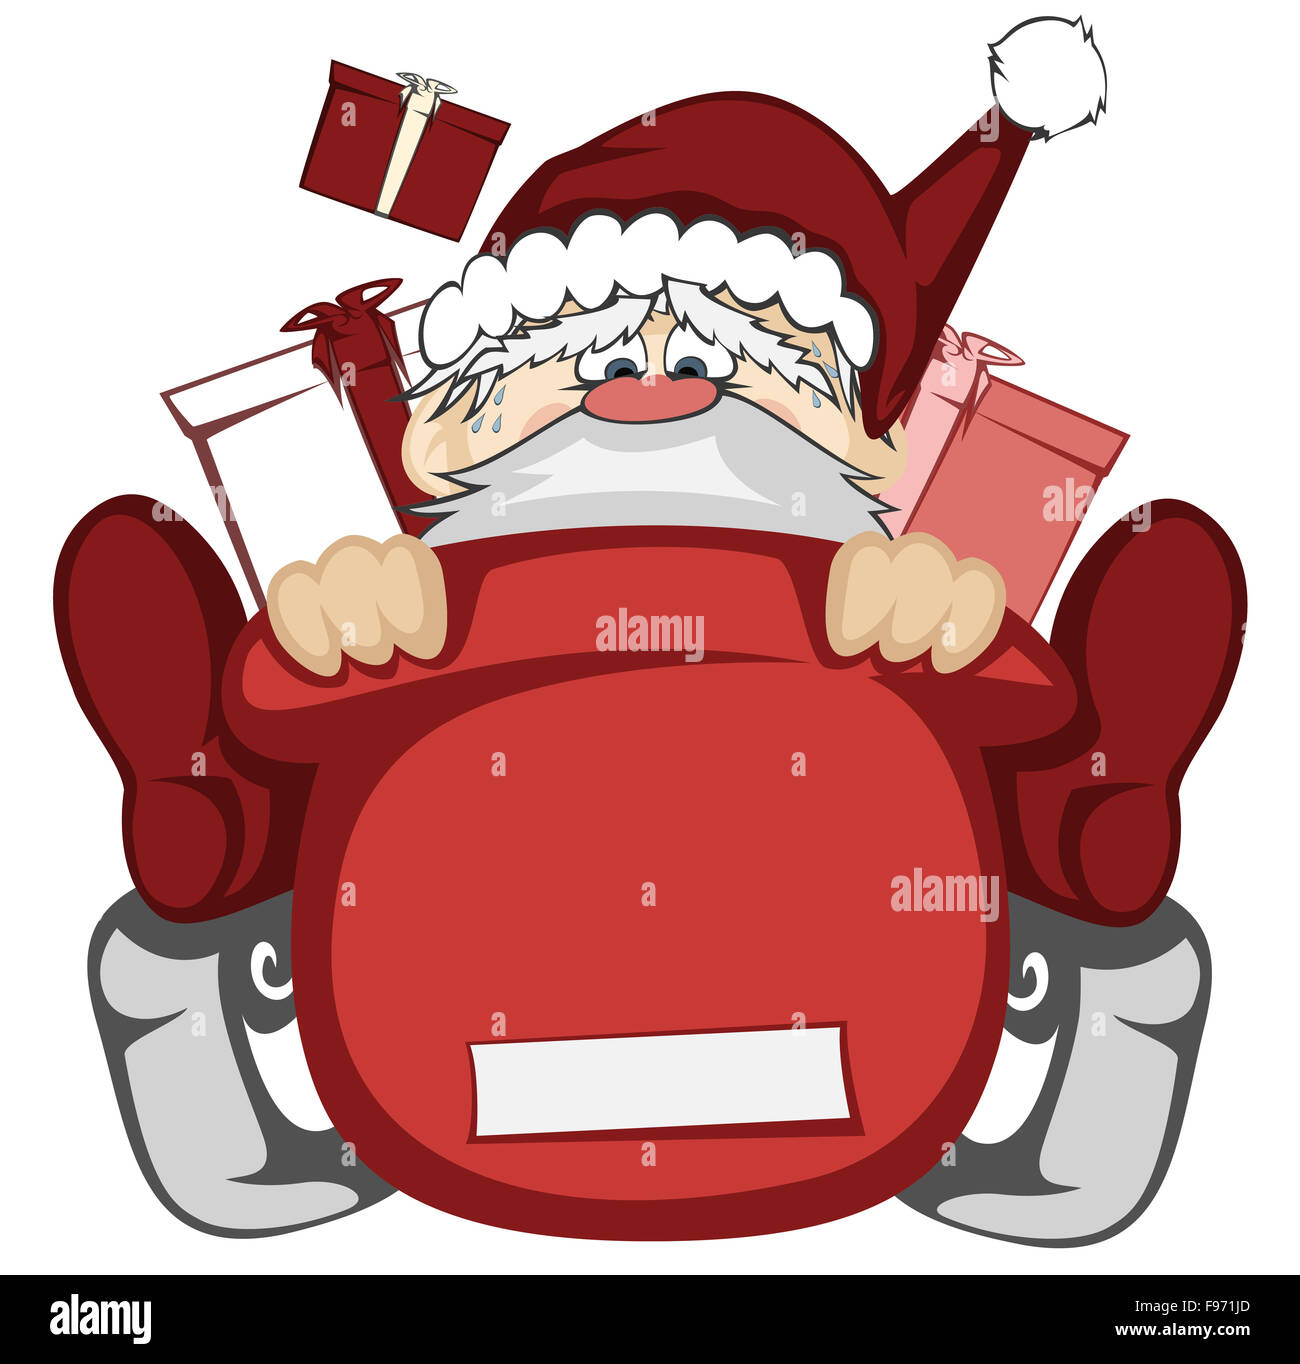 Santa Claus in action - Santa sleigh is out of control Stock Photo